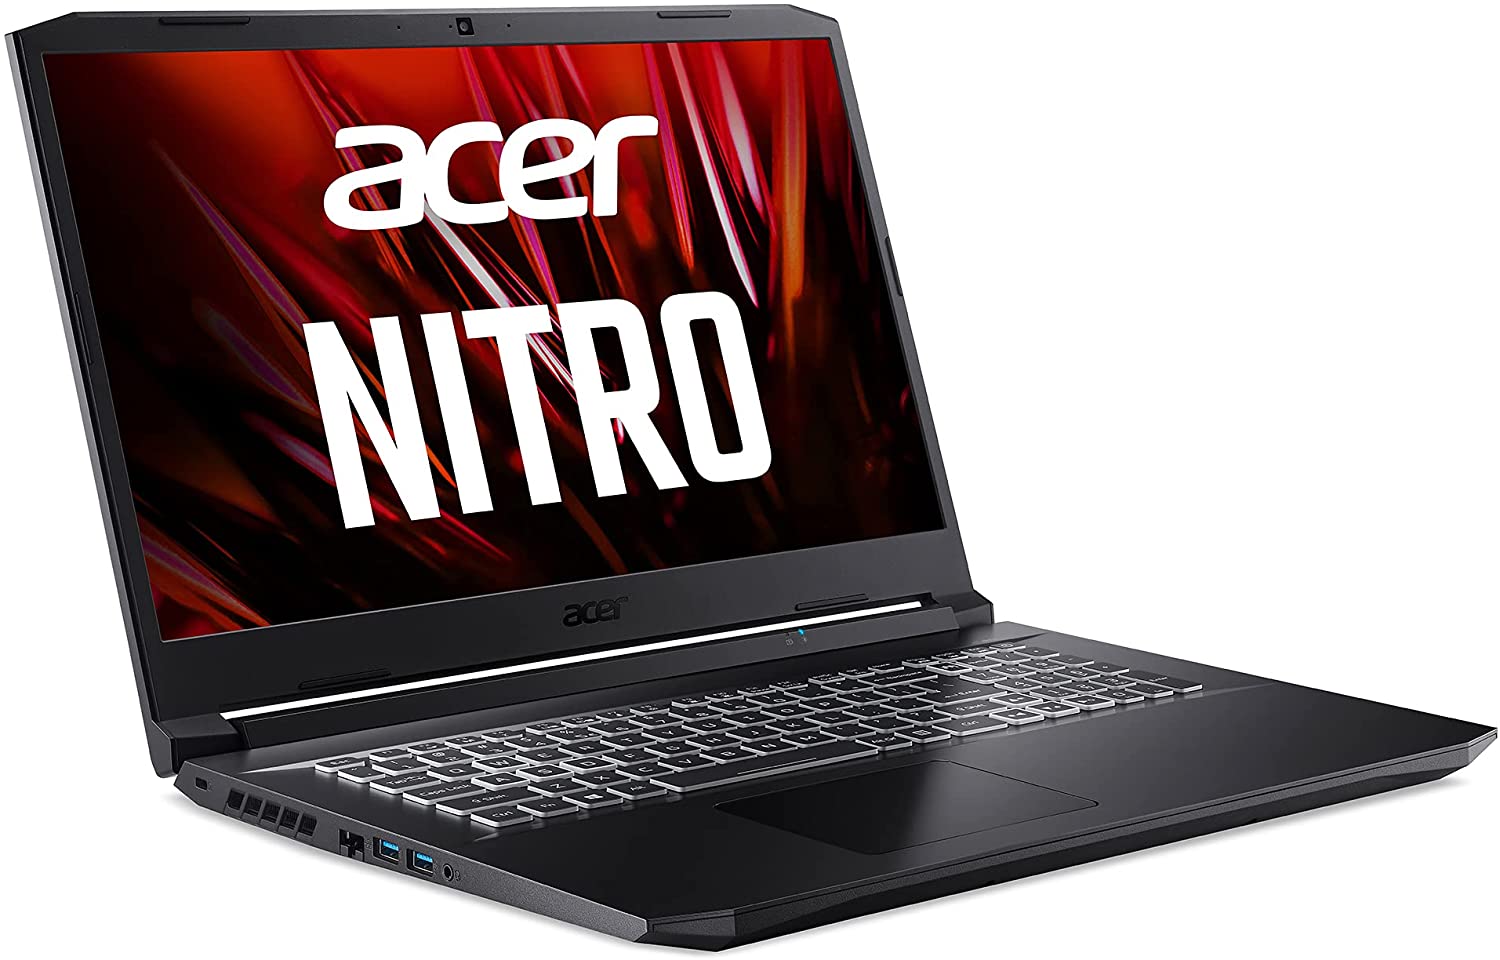 Image for Save £100 on this Acer Nitro 5 laptop, equipped with a QHD display and RTX 3060